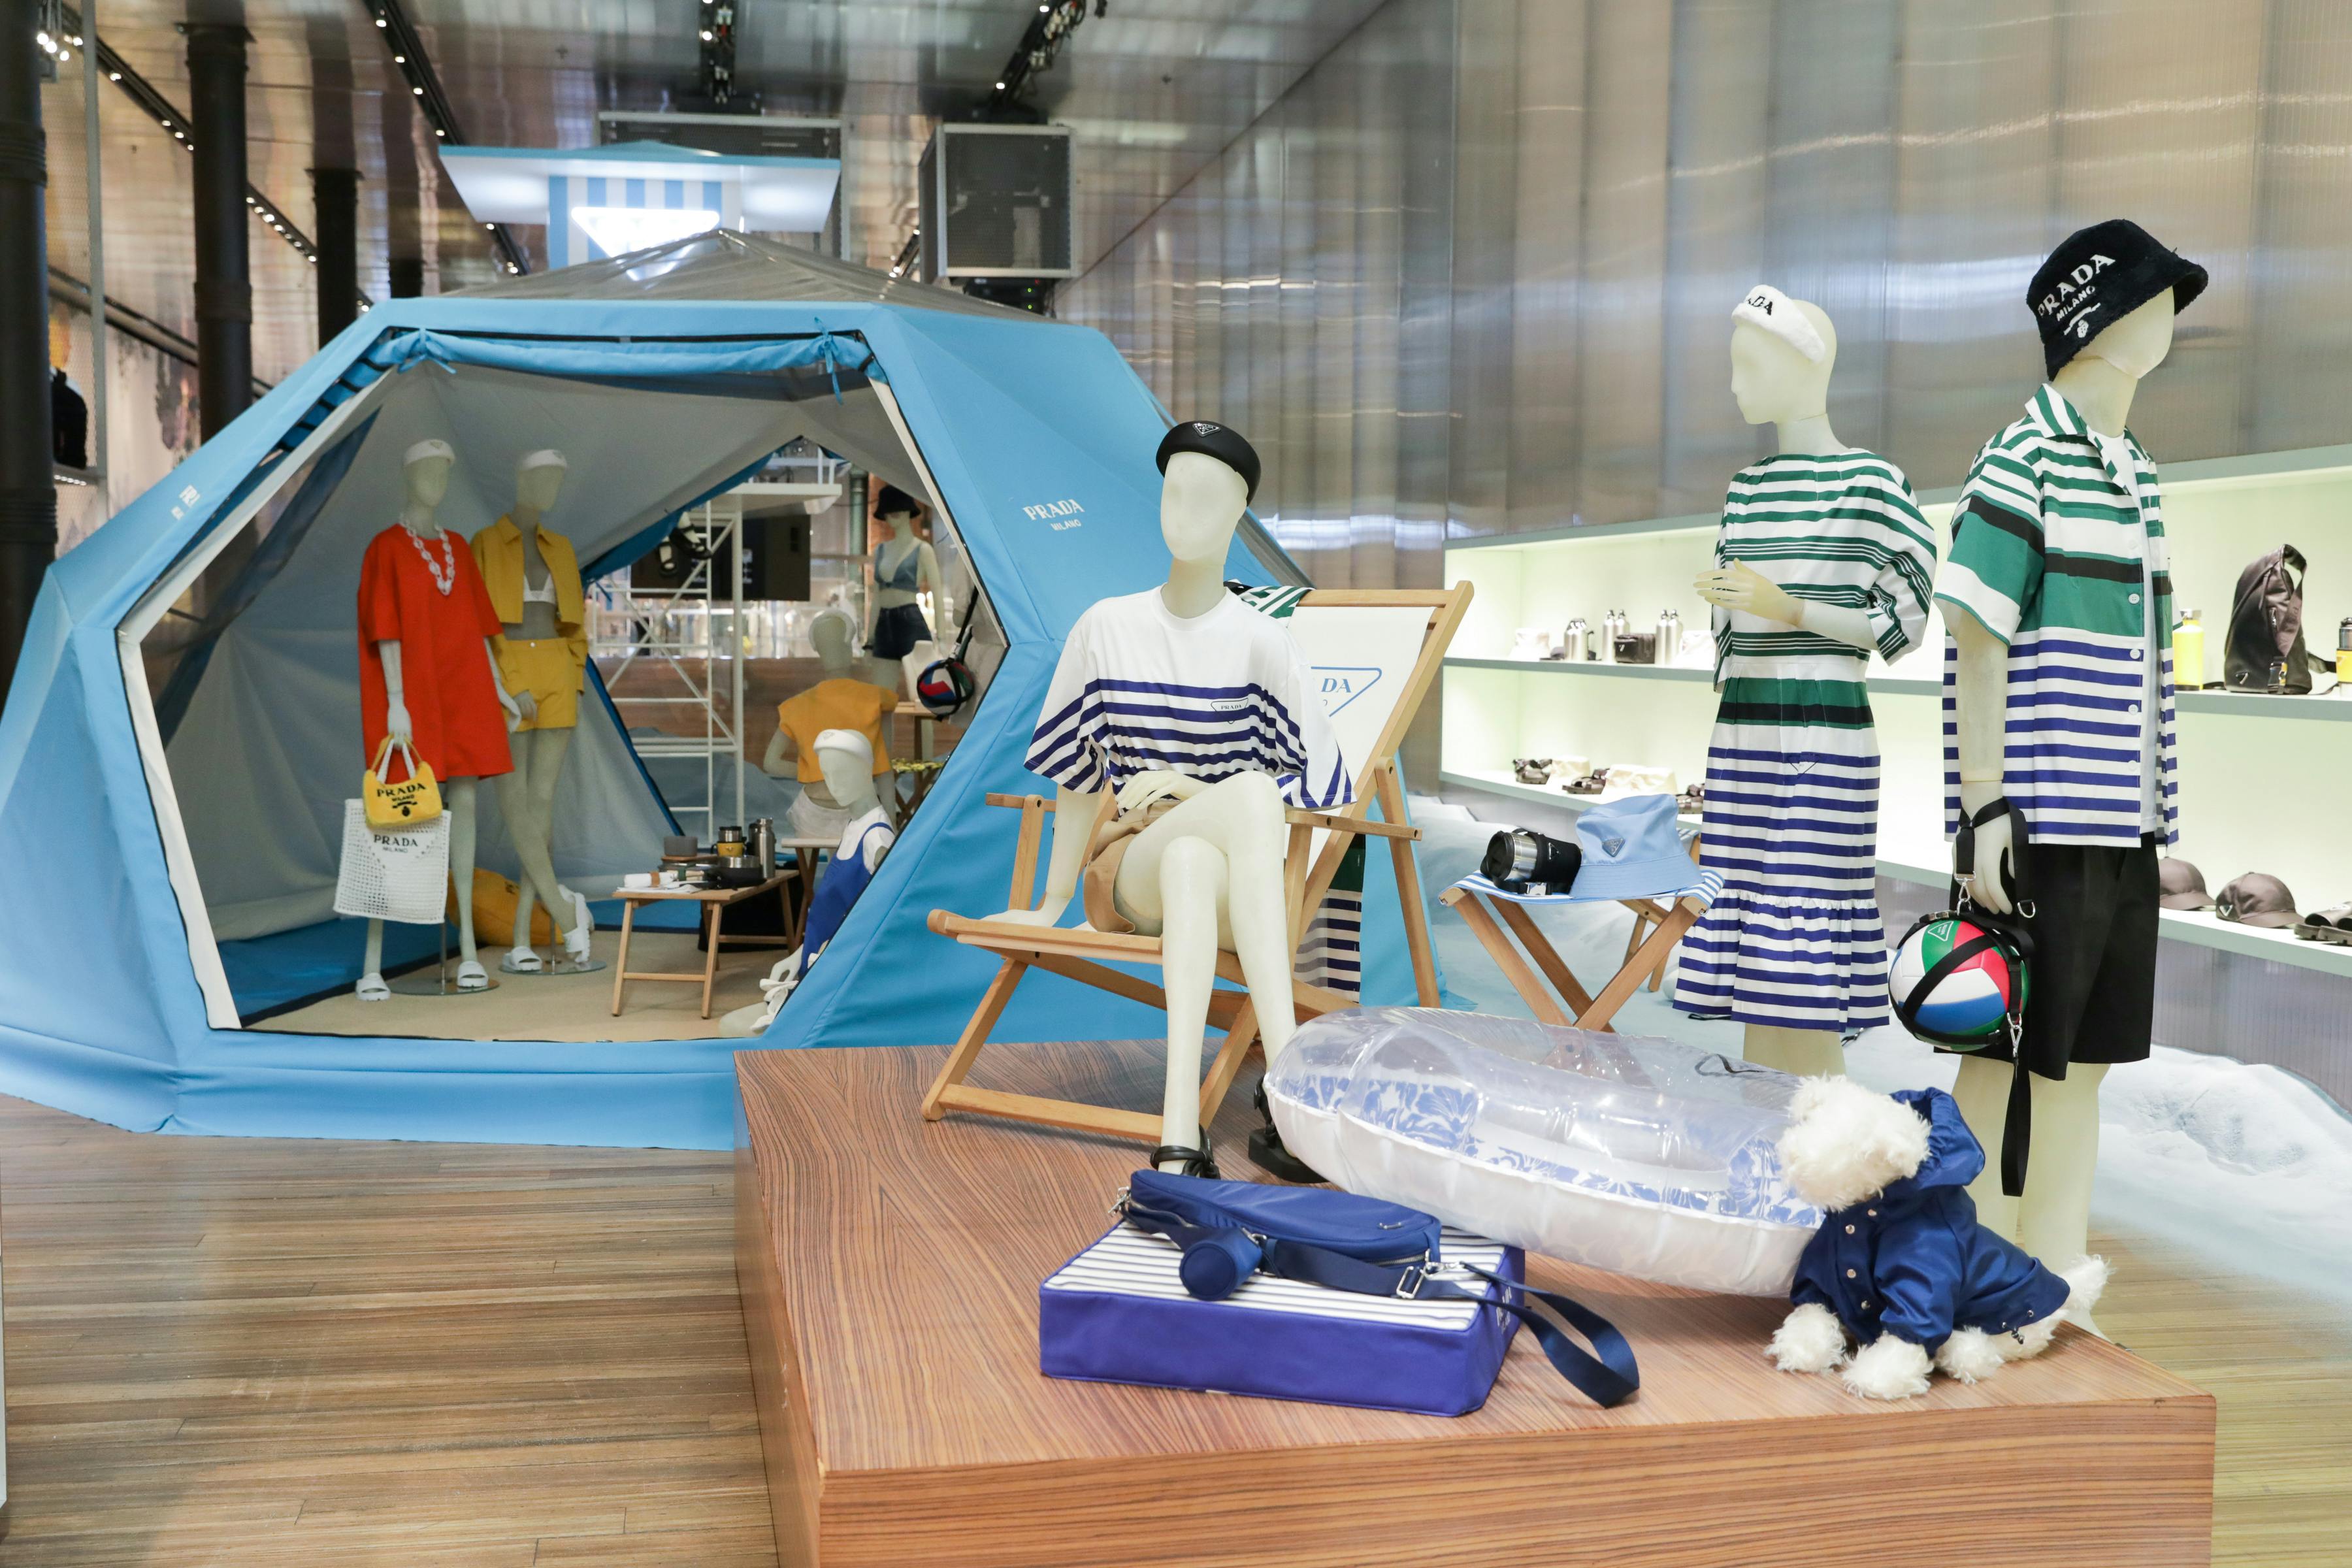 Prada Debuts Outdoor Collection with Beach-Themed Pop-Up in NYC